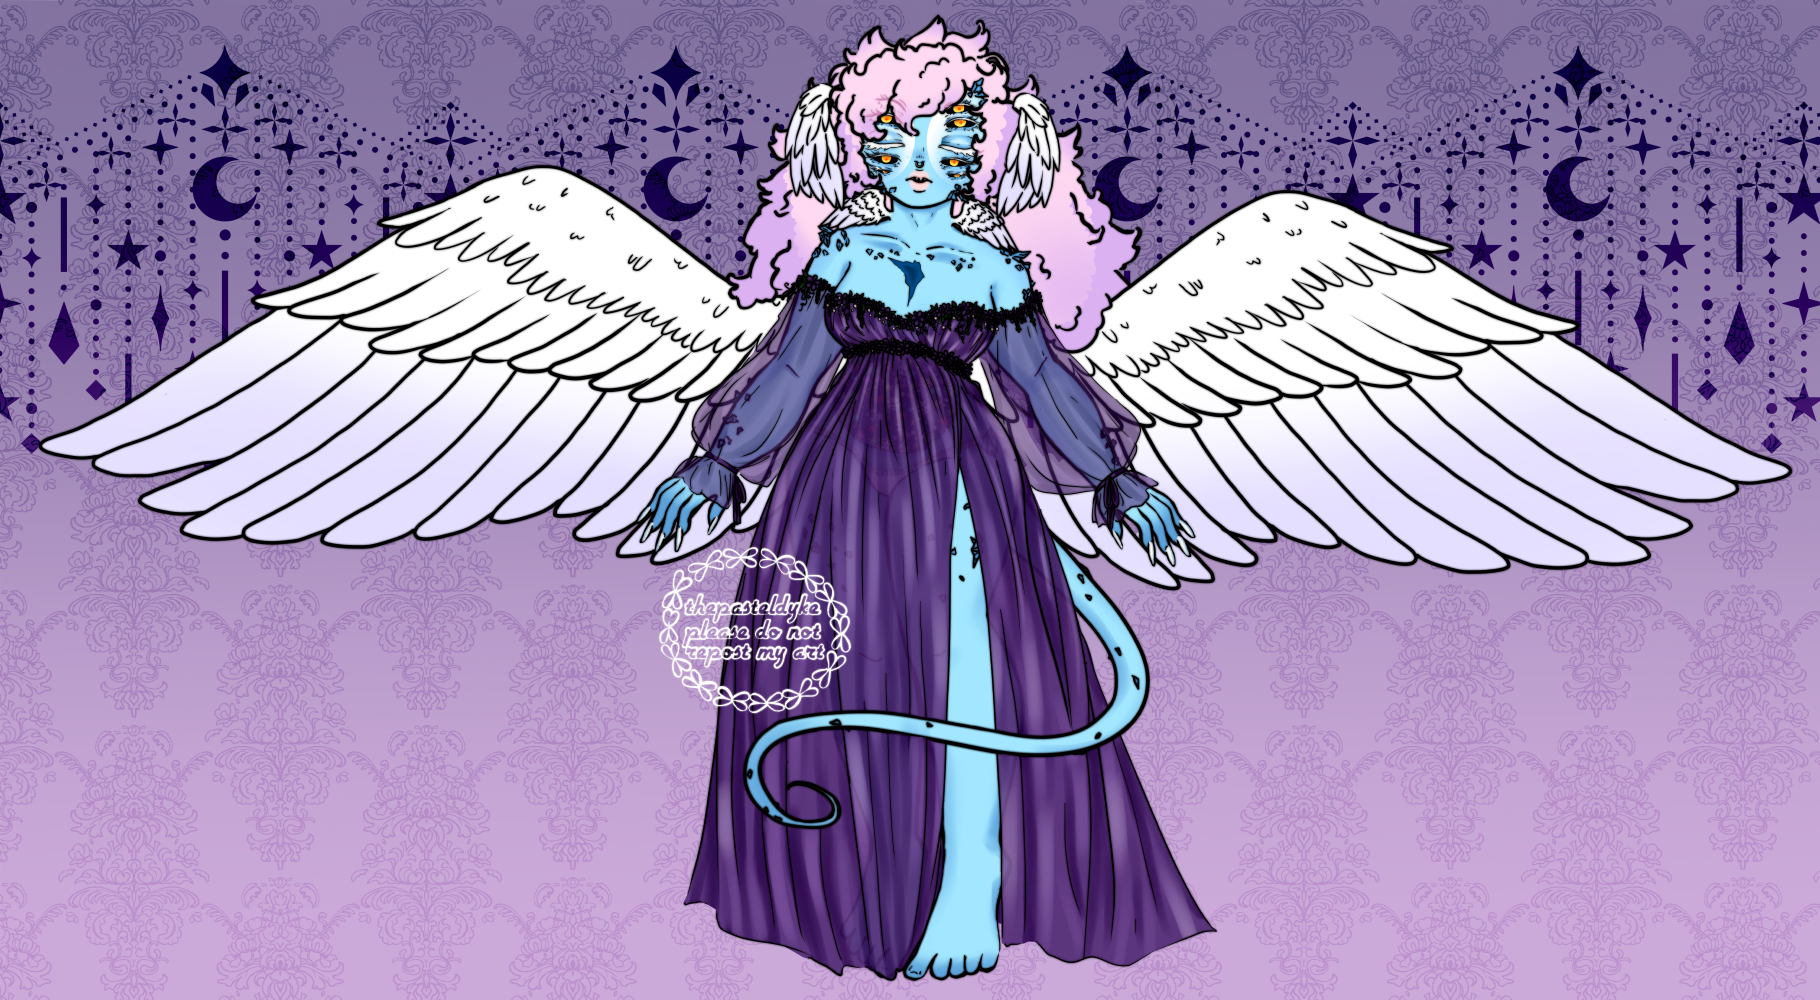 Character name: Yen. Yen has light blue skin with white facial markings. She has five sets of eyes with long white eyelashes. She has blue minerals growing out of her skin, a dark blue scar in the center of her chest. She has a huge set of wings growing out of her lower back, smaller wings growing out of the side of her head right by her ears and tiny wings growing out of the side of her neck. Her long and fluffy pink and purple hair reach down her back. She has a tail that ends in a skinny tip. She's wearing a sheer purple dress with a slit all the way up one leg.